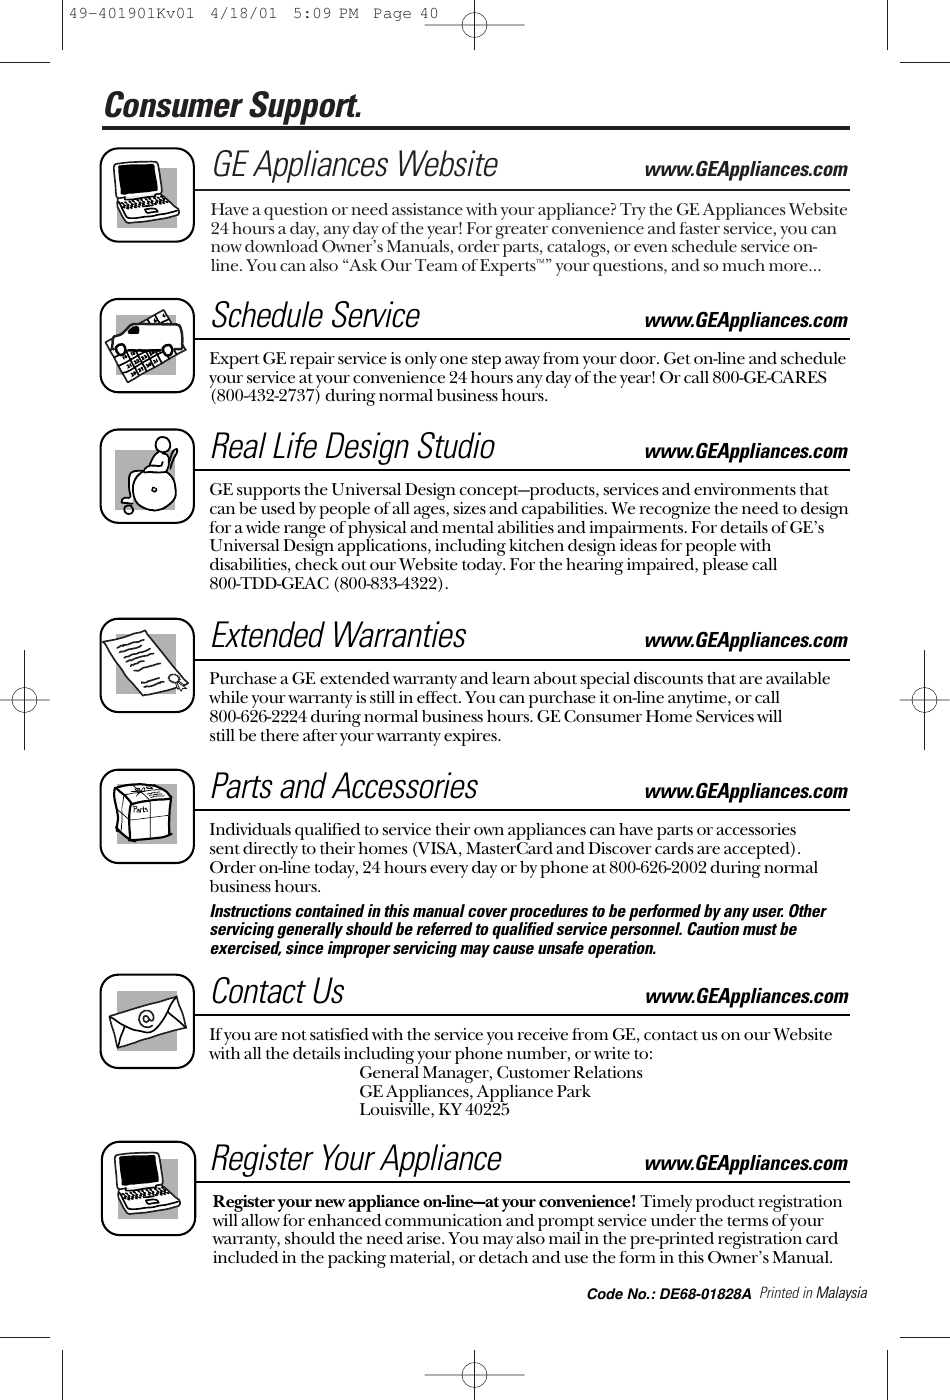 Printed in MalaysiaConsumer Support. GE Appliances Websitewww.GEAppliances.comHave a question or need assistance with your appliance? Try the GE Appliances Website24 hours a day, any day of the year! For greater convenience and faster service, you cannow download Owner’s Manuals, order parts, catalogs, or even schedule service on-line. You can also “Ask Our Team of Experts™” your questions, and so much more...Schedule Servicewww.GEAppliances.comExpert GE repair service is only one step away from your door. Get on-line and scheduleyour service at your convenience 24 hours any day of the year! Or call 800-GE-CARES(800-432-2737) during normal business hours.Real Life Design Studiowww.GEAppliances.comGE supports the Universal Design concept—products, services and environments thatcan be used by people of all ages, sizes and capabilities. We recognize the need to designfor a wide range of physical and mental abilities and impairments. For details of GE’sUniversal Design applications, including kitchen design ideas for people withdisabilities, check out our Website today. For the hearing impaired, please call 800-TDD-GEAC (800-833-4322). Extended Warrantieswww.GEAppliances.comPurchase a GE extended warranty and learn about special discounts that are availablewhile your warranty is still in effect. You can purchase it on-line anytime, or call 800-626-2224 during normal business hours. GE Consumer Home Services will still be there after your warranty expires.Parts and Accessories www.GEAppliances.comIndividuals qualified to service their own appliances can have parts or accessories sent directly to their homes (VISA, MasterCard and Discover cards are accepted). Order on-line today, 24 hours every day or by phone at 800-626-2002 during normalbusiness hours.Instructions contained in this manual cover procedures to be performed by any user. Otherservicing generally should be referred to qualified service personnel. Caution must beexercised, since improper servicing may cause unsafe operation. Contact Uswww.GEAppliances.comIf you are not satisfied with the service you receive from GE, contact us on our Websitewith all the details including your phone number, or write to: General Manager, Customer RelationsGE Appliances, Appliance ParkLouisville, KY 40225Register Your Appliancewww.GEAppliances.comRegister your new appliance on-line—at your convenience! Timely product registrationwill allow for enhanced communication and prompt service under the terms of yourwarranty, should the need arise. You may also mail in the pre-printed registration cardincluded in the packing material, or detach and use the form in this Owner’s Manual.49-401901Kv01  4/18/01  5:09 PM  Page 40Code No.: DE68-01828A